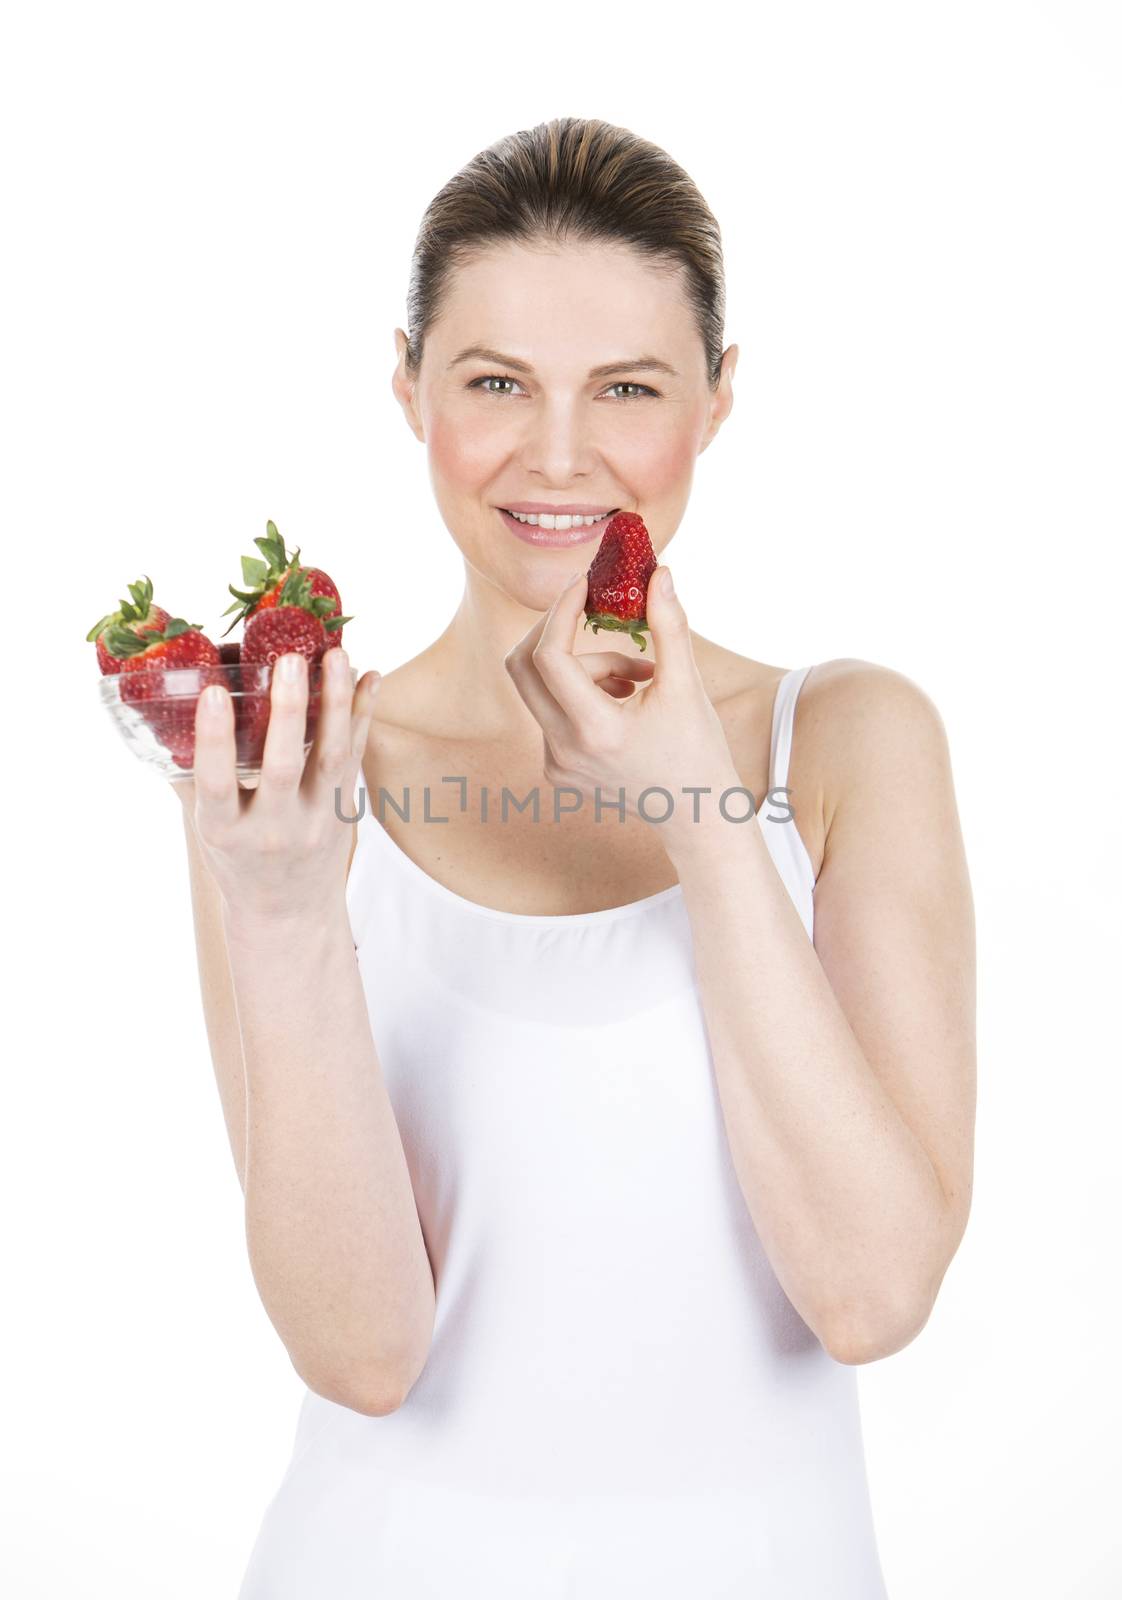 woman with white dress holding some strawberries
